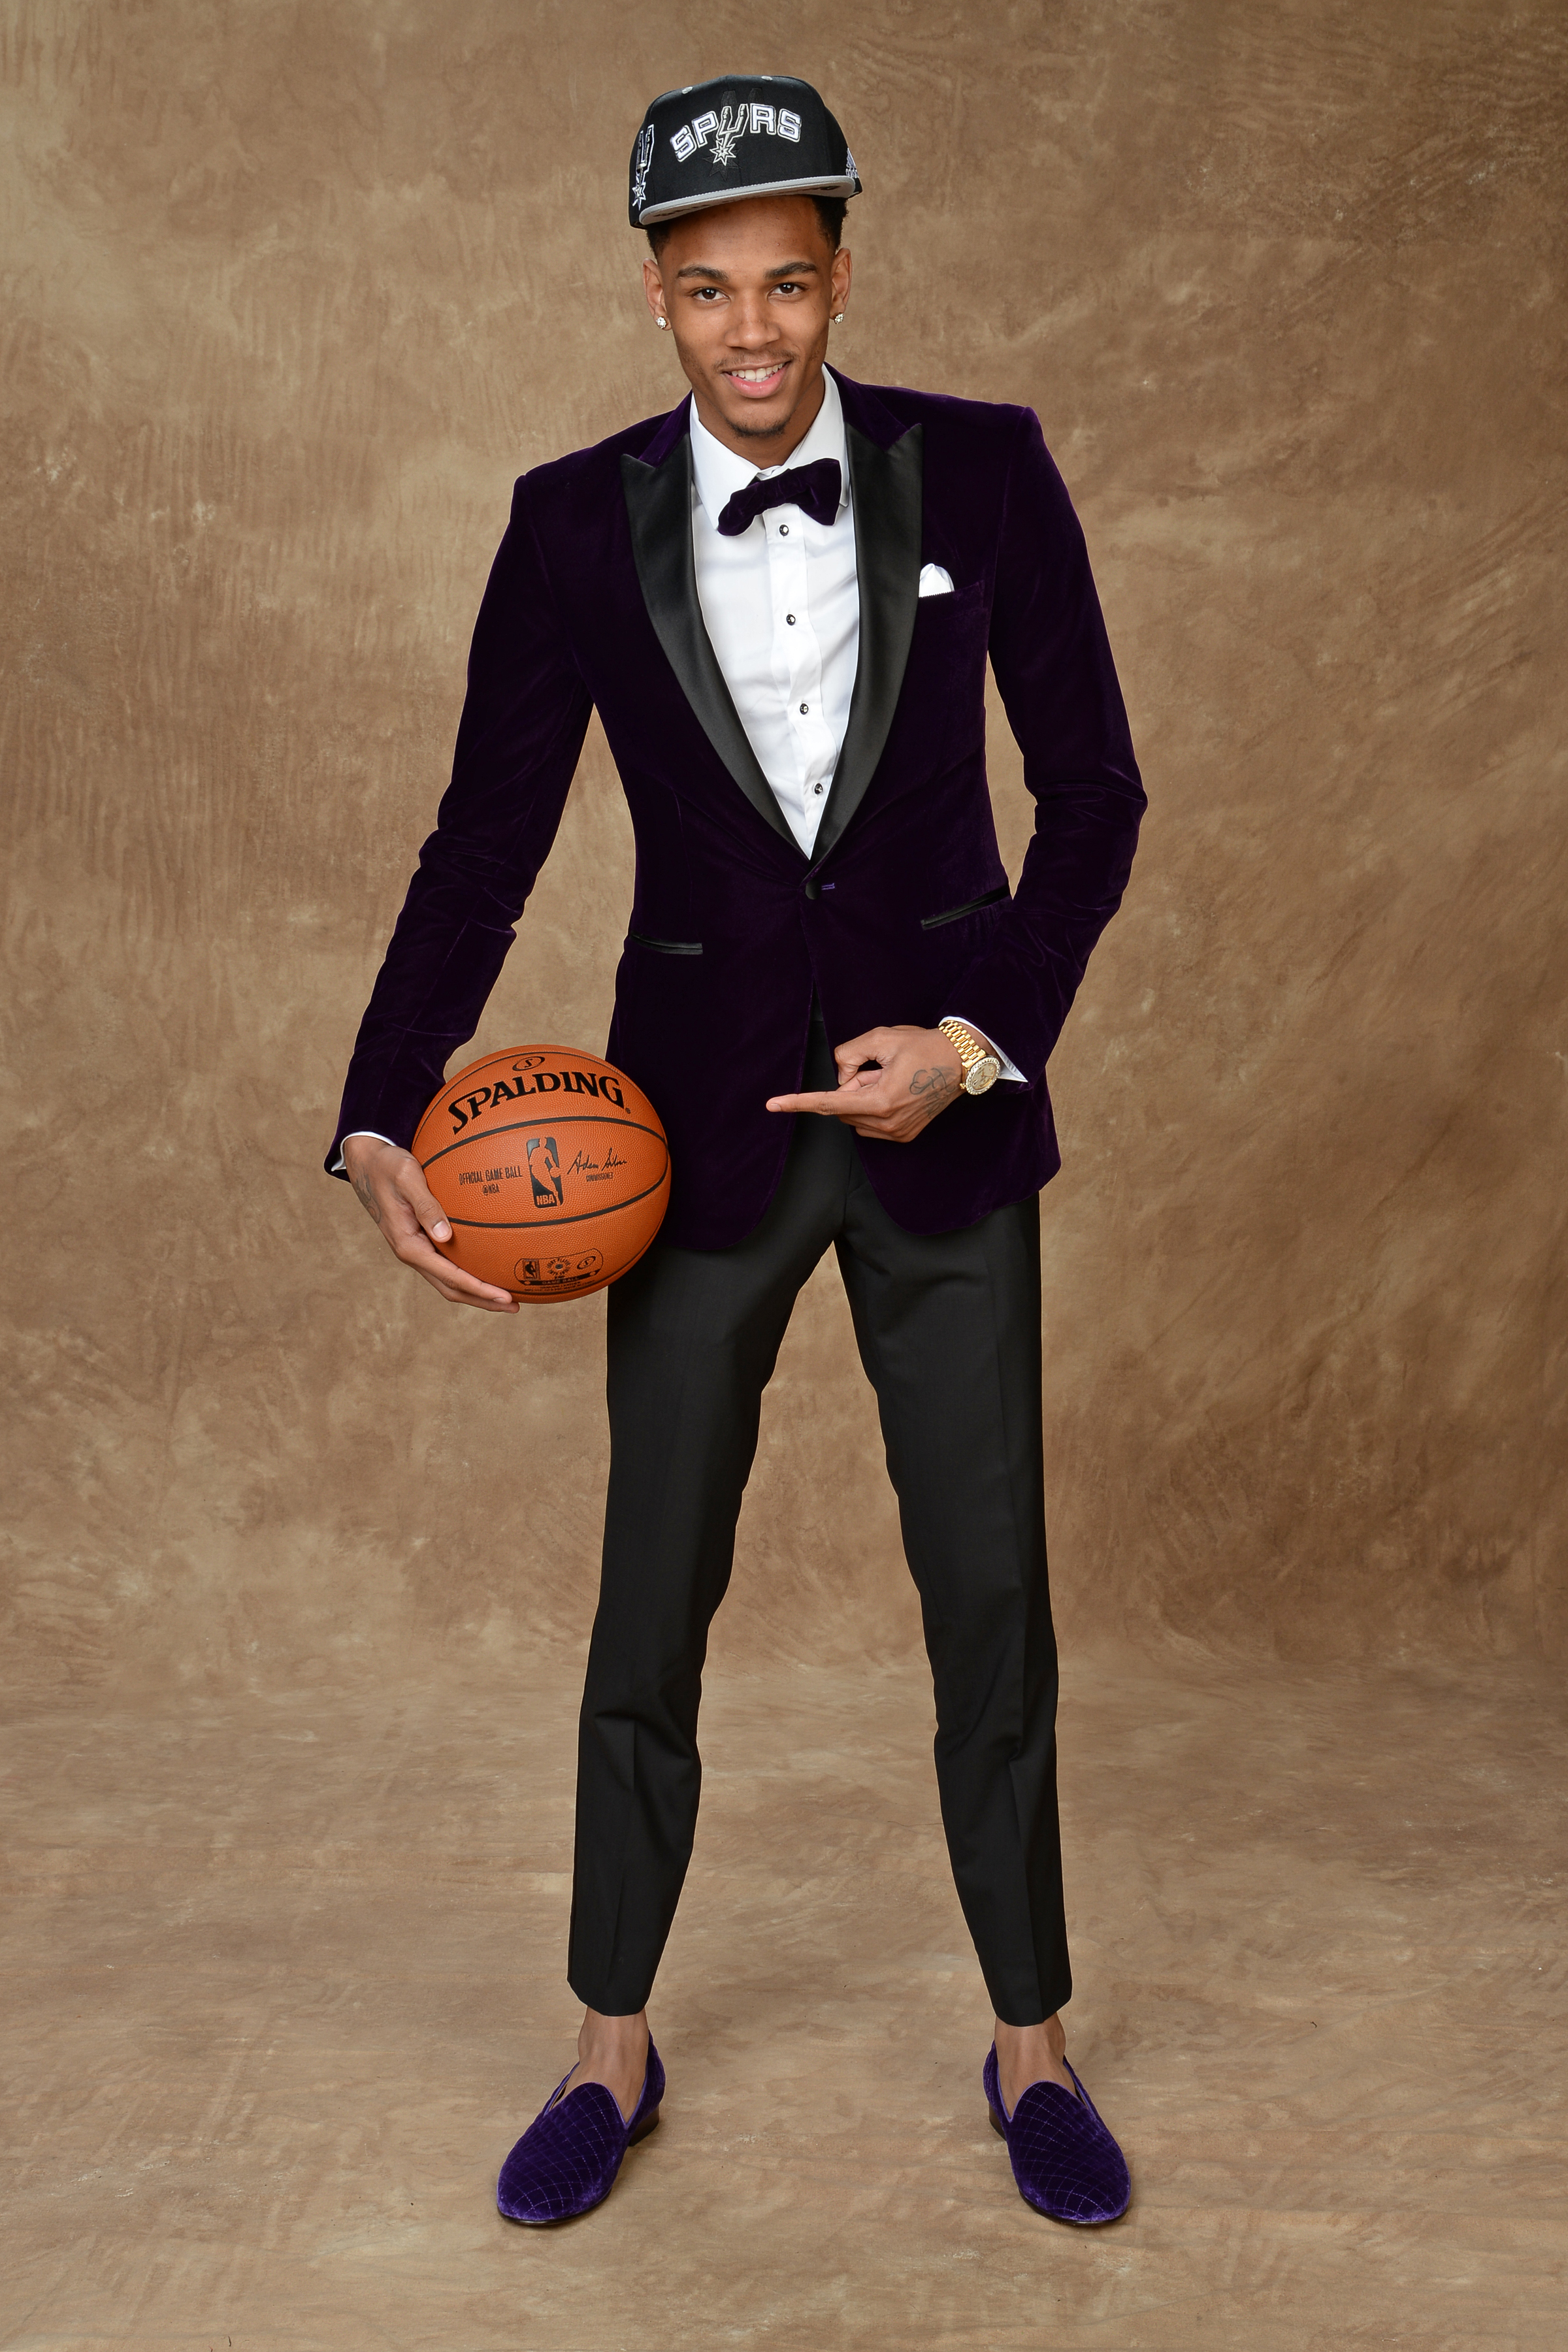 Dejounte Murraye opted for a luxurious velvet tuxedo jacket, which he paired with royal purple velvet smoking slippers.